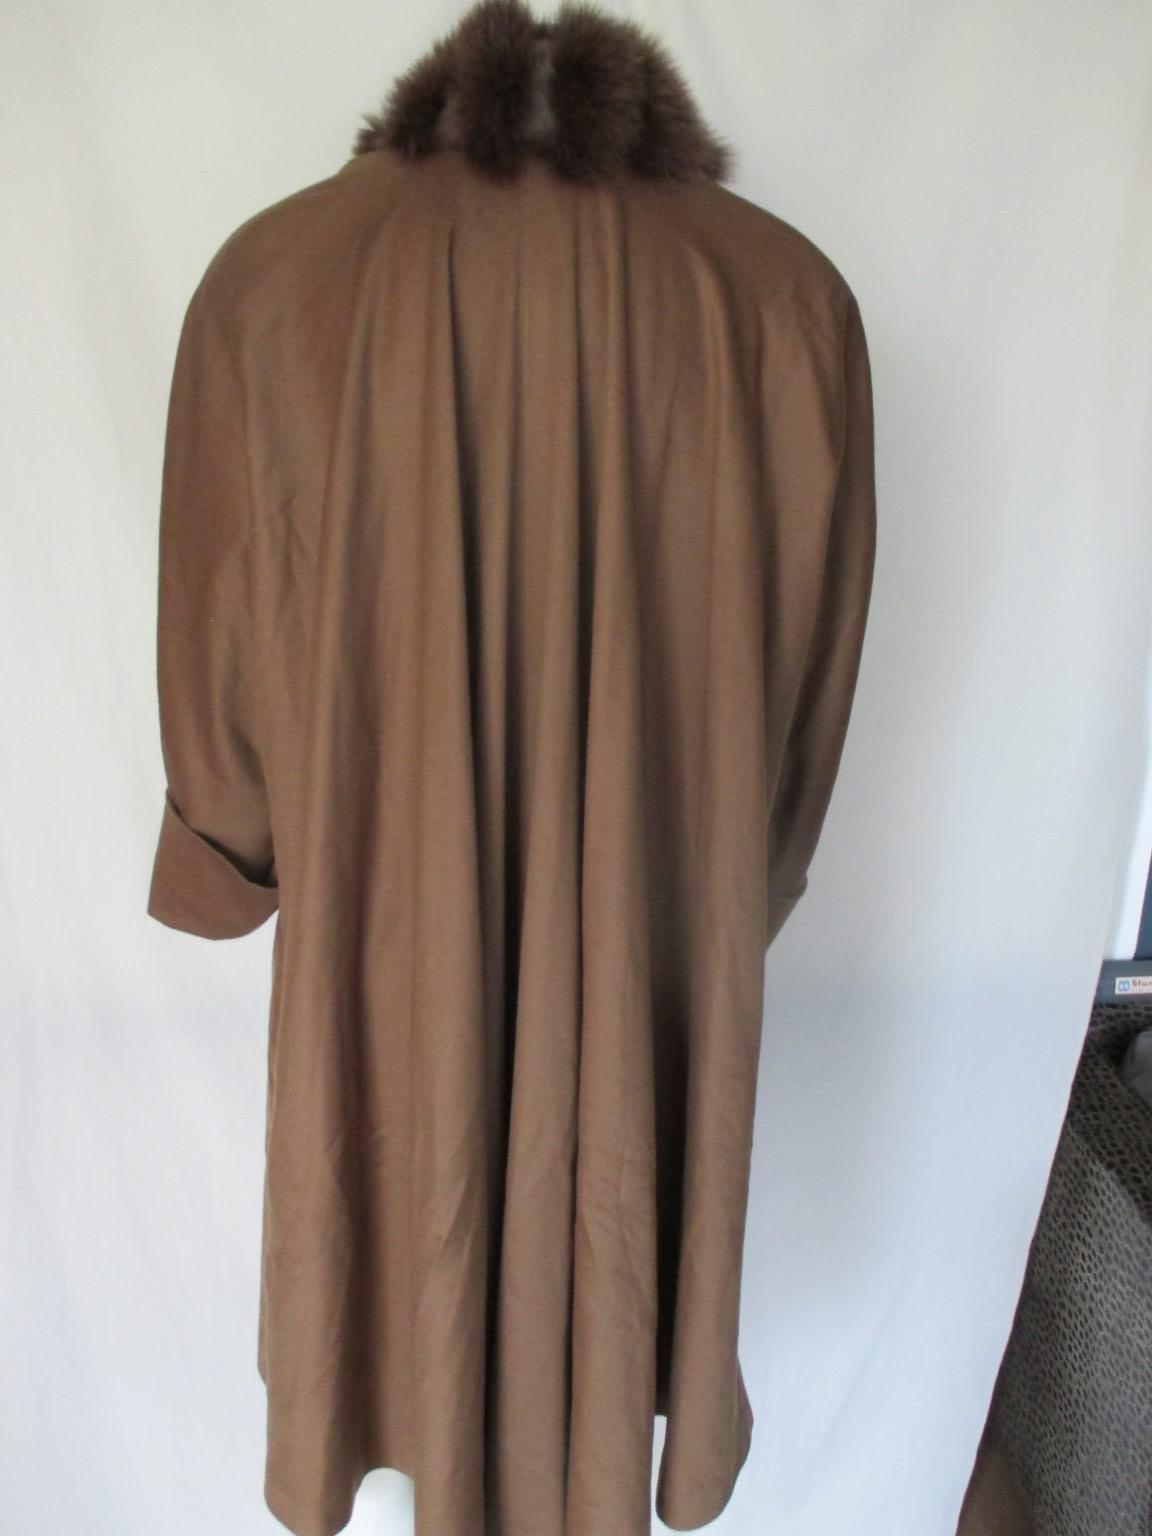 Sprung Freres Paris Brown Cashmere Fur Stole Cape In Good Condition For Sale In Amsterdam, NL